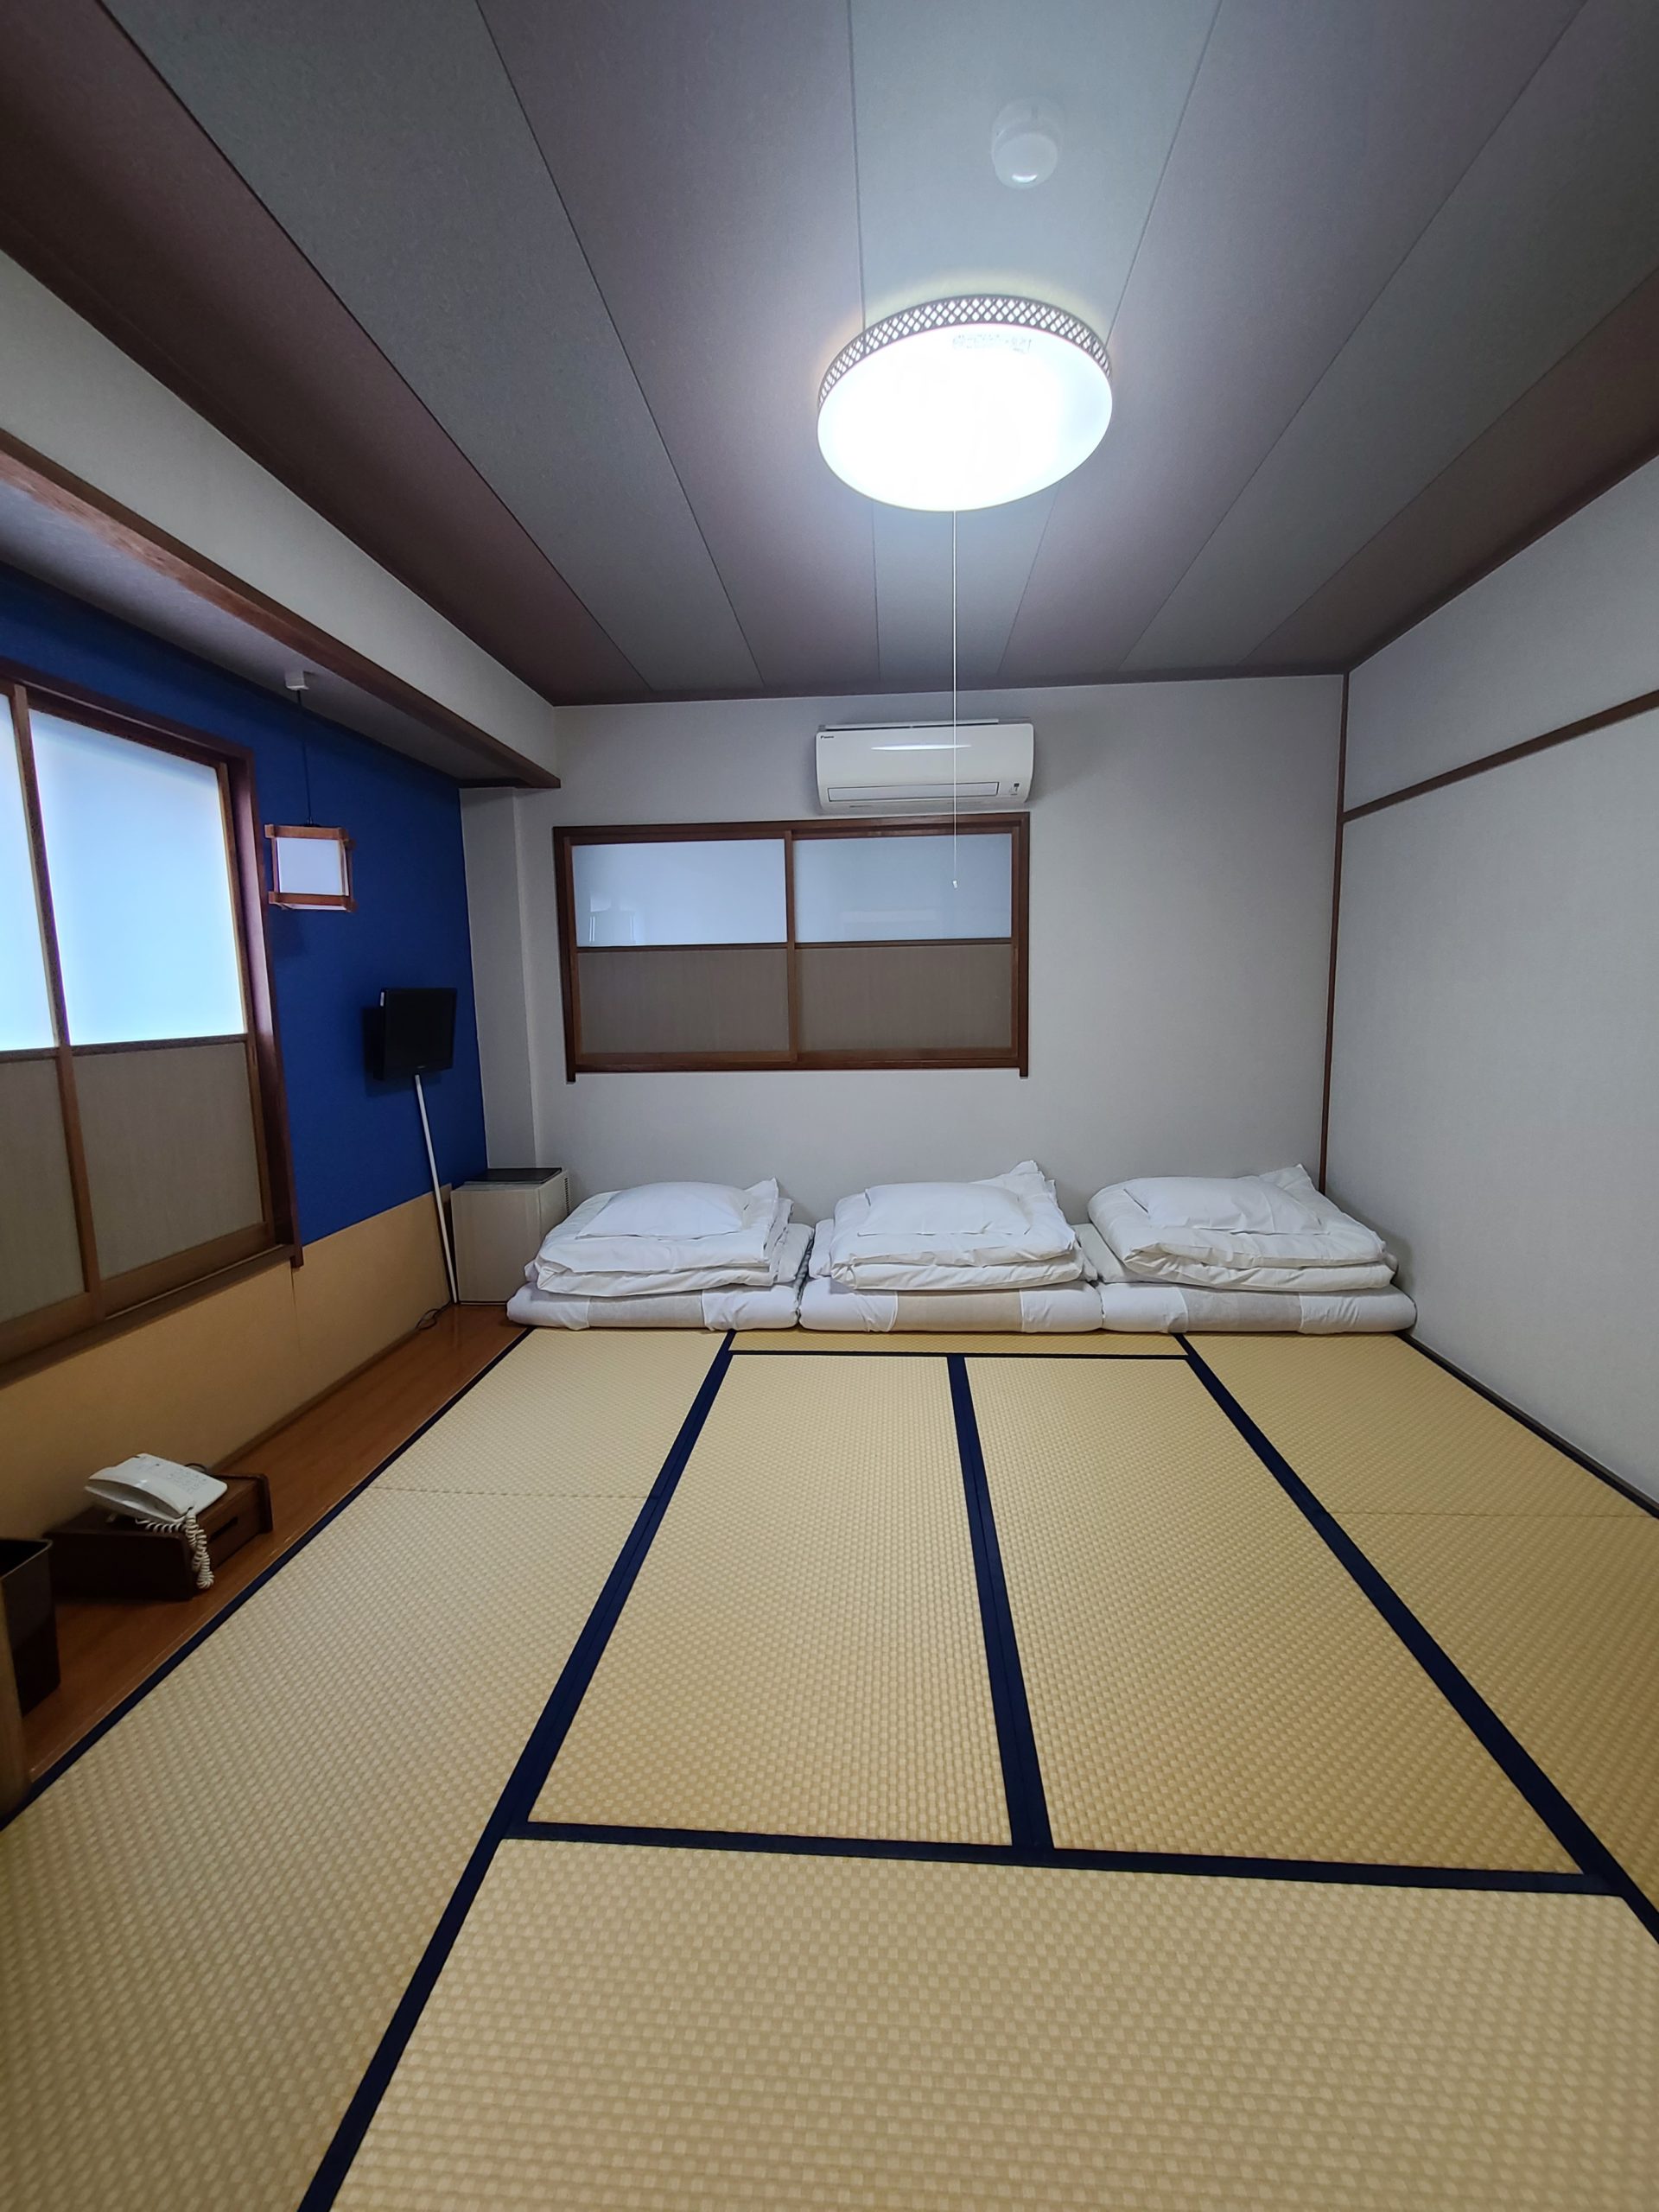 What strikes me the most, however, are the tatami in the Japanese-style rooms. 